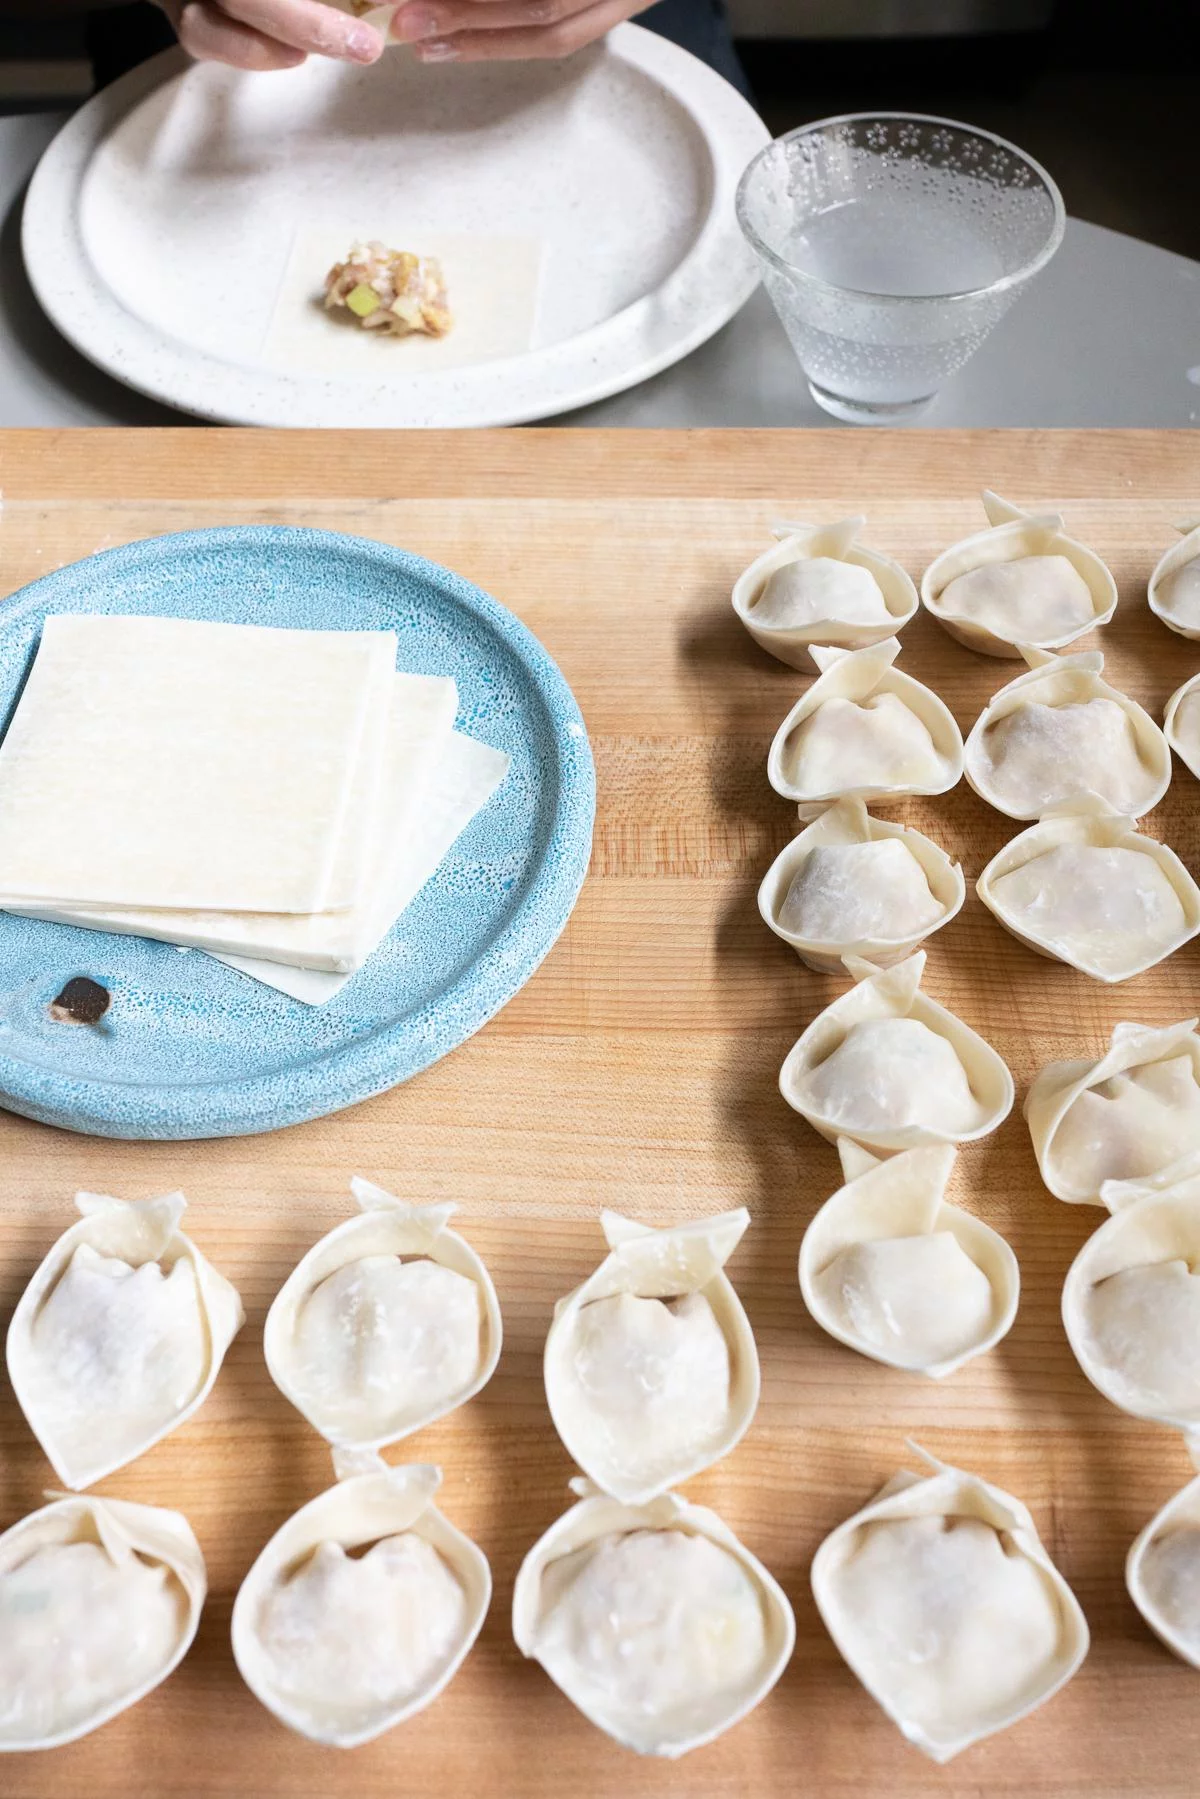 A cutting board filled with wrapped wontons